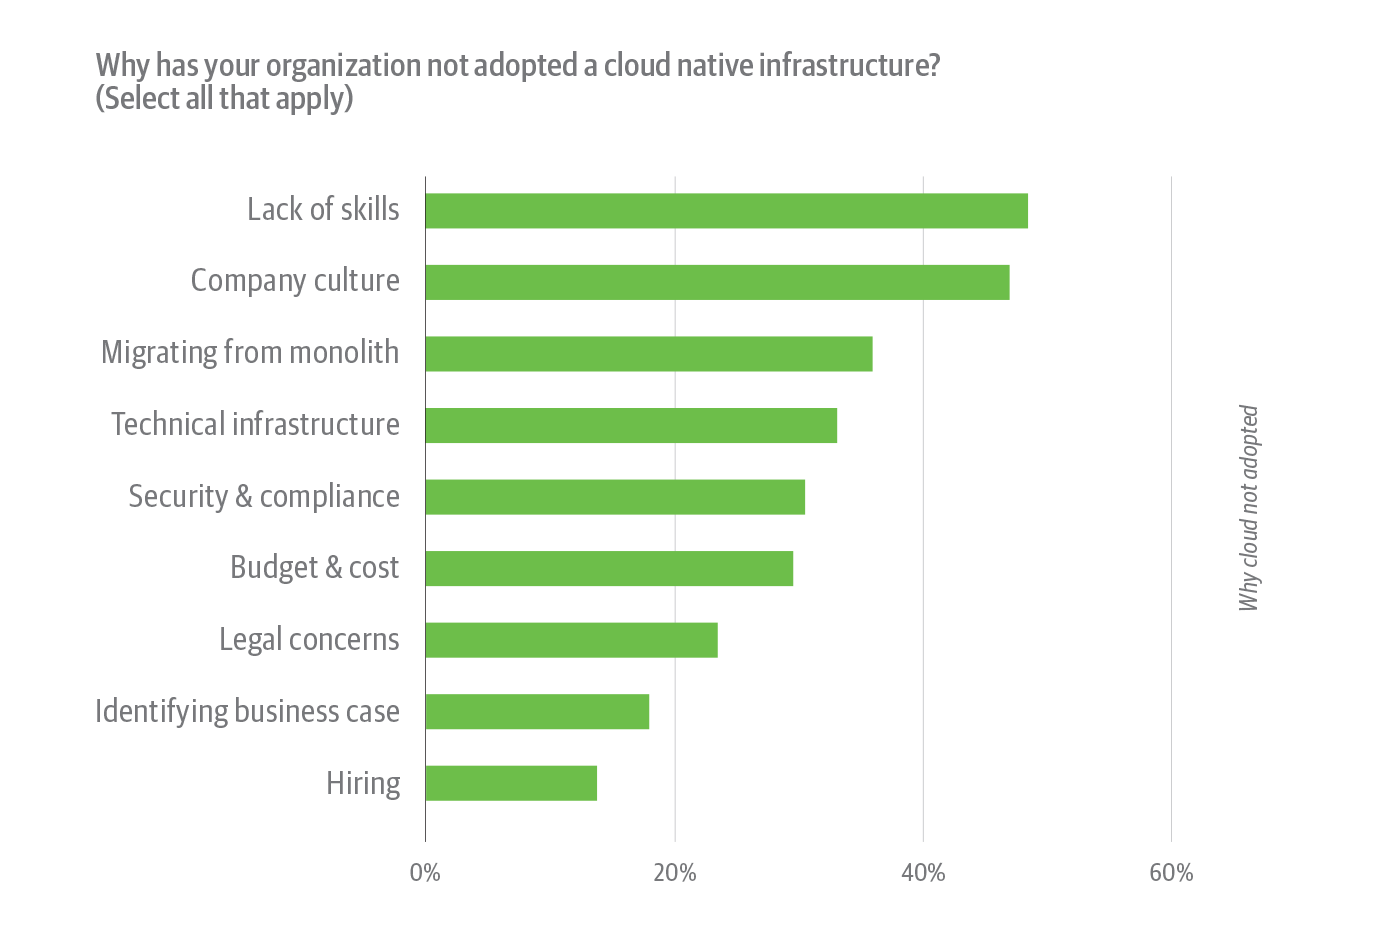 Reasons why survey respondents have not adopted cloud native, among respondents who have not yet implemented cloud native infrastructure